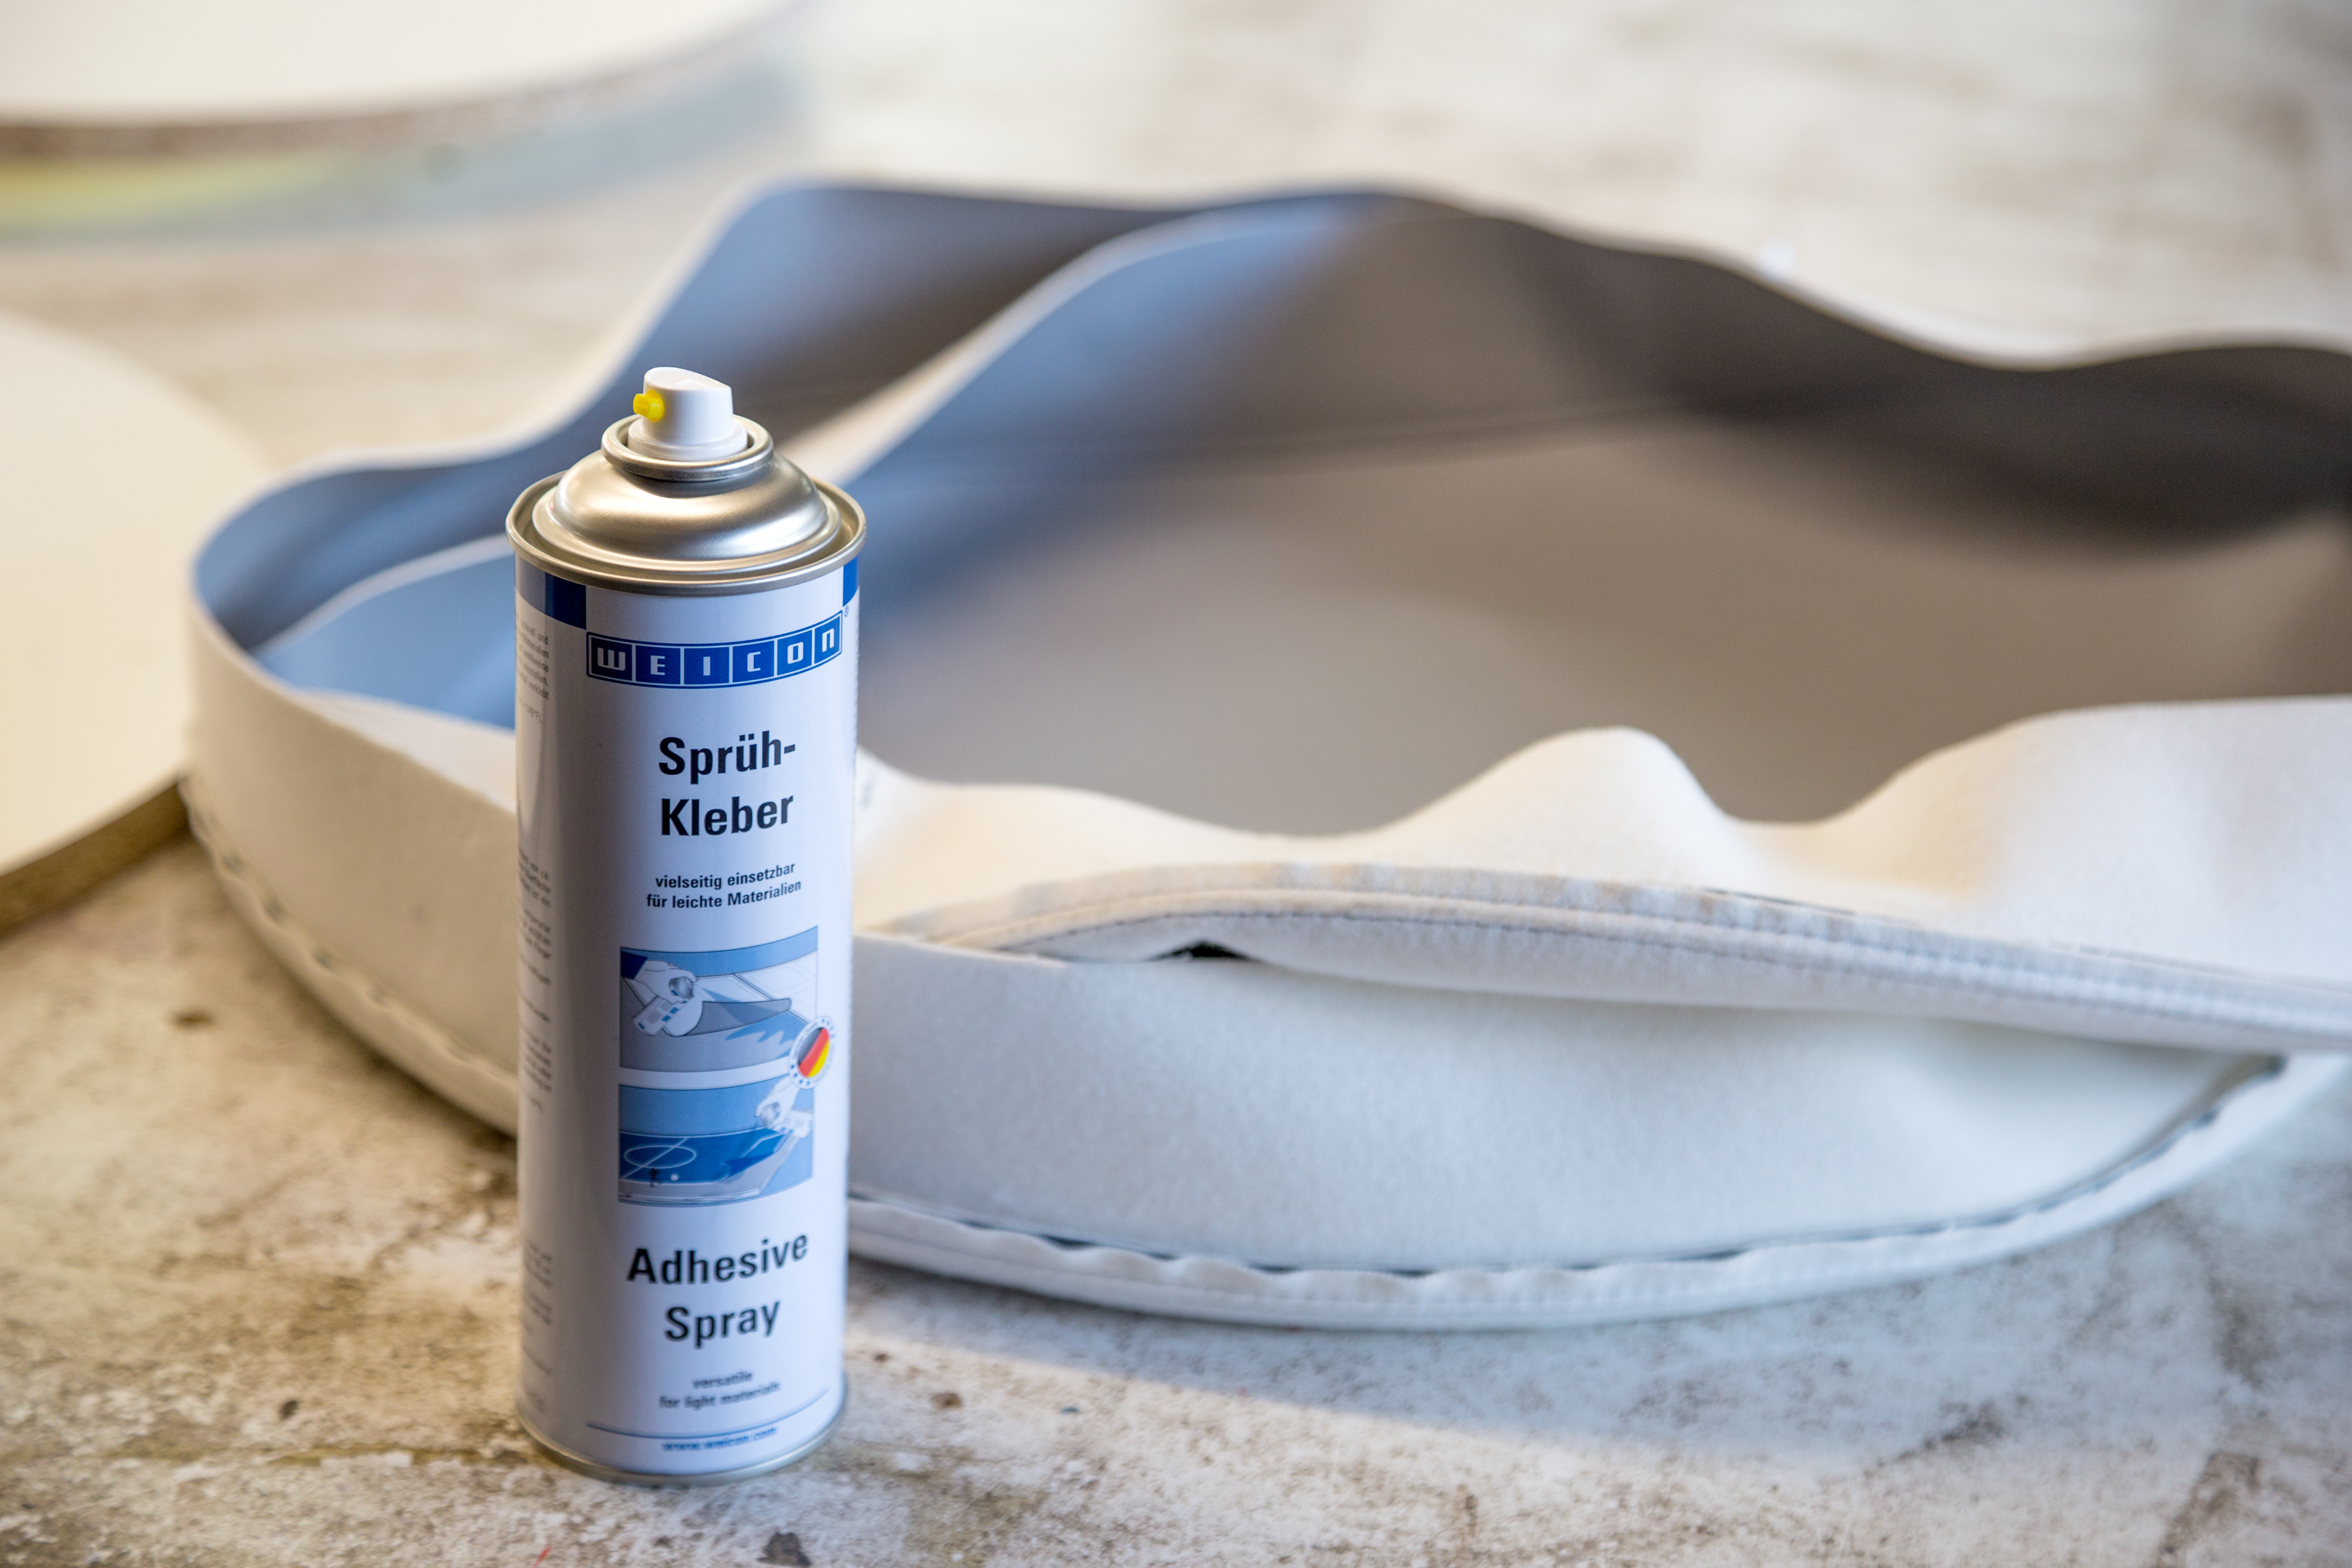 Adhesive Spray | sprayable contact adhesive, ideal for cardboard and paper